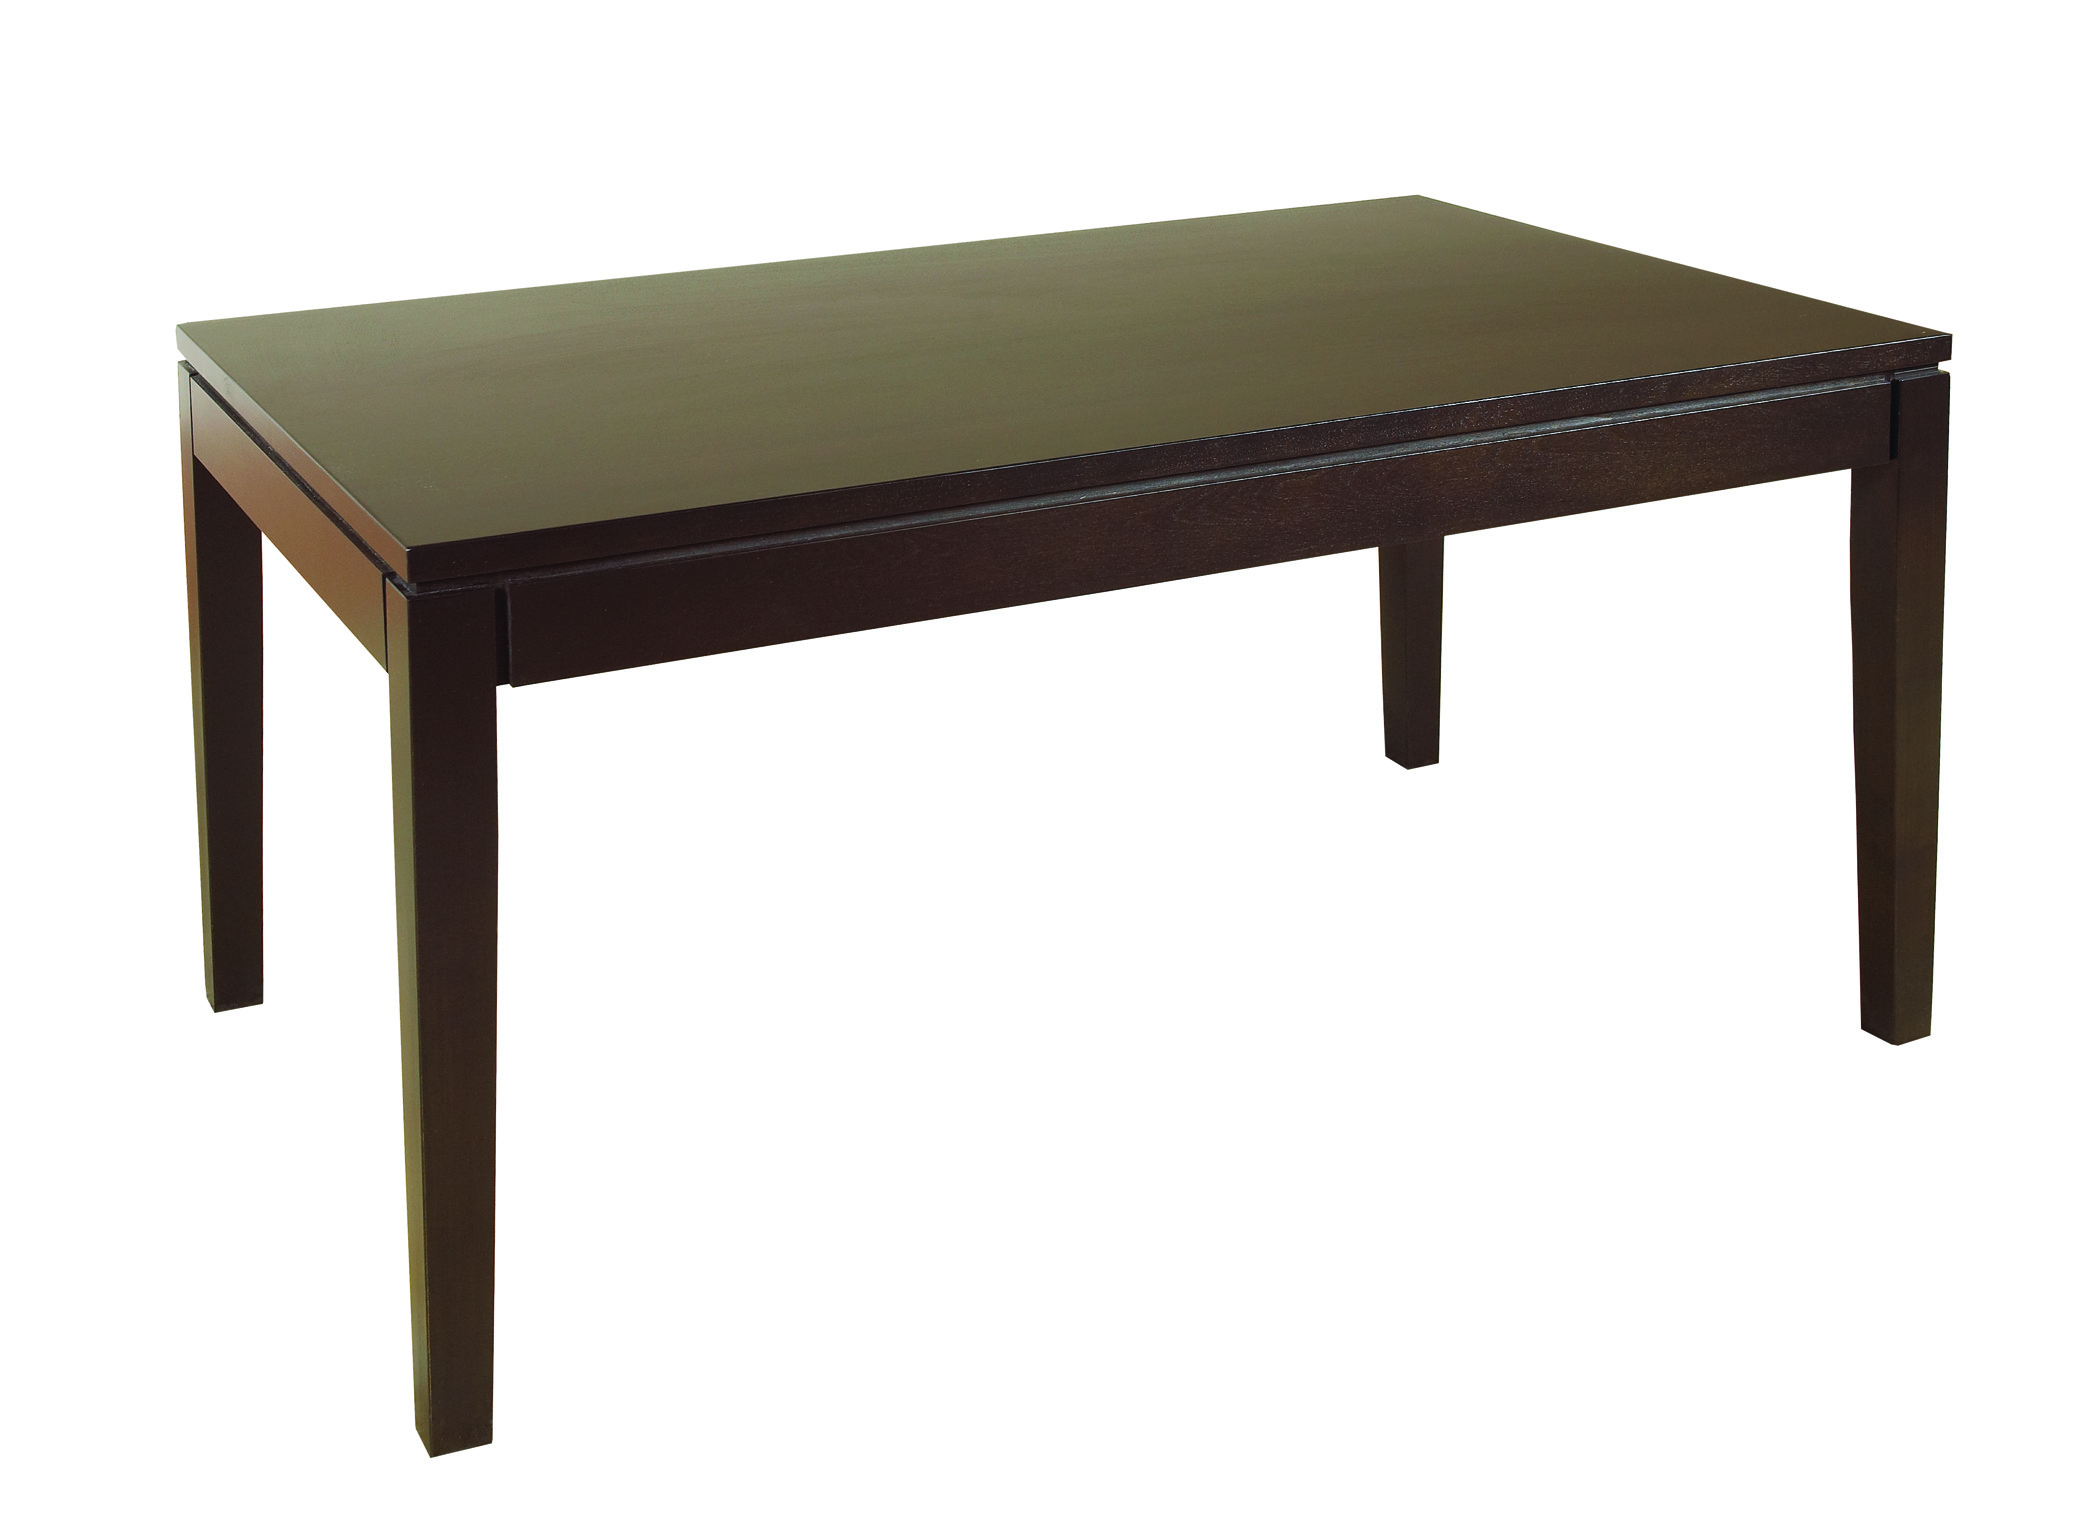 3660 Condo Dining Table with Square Leg